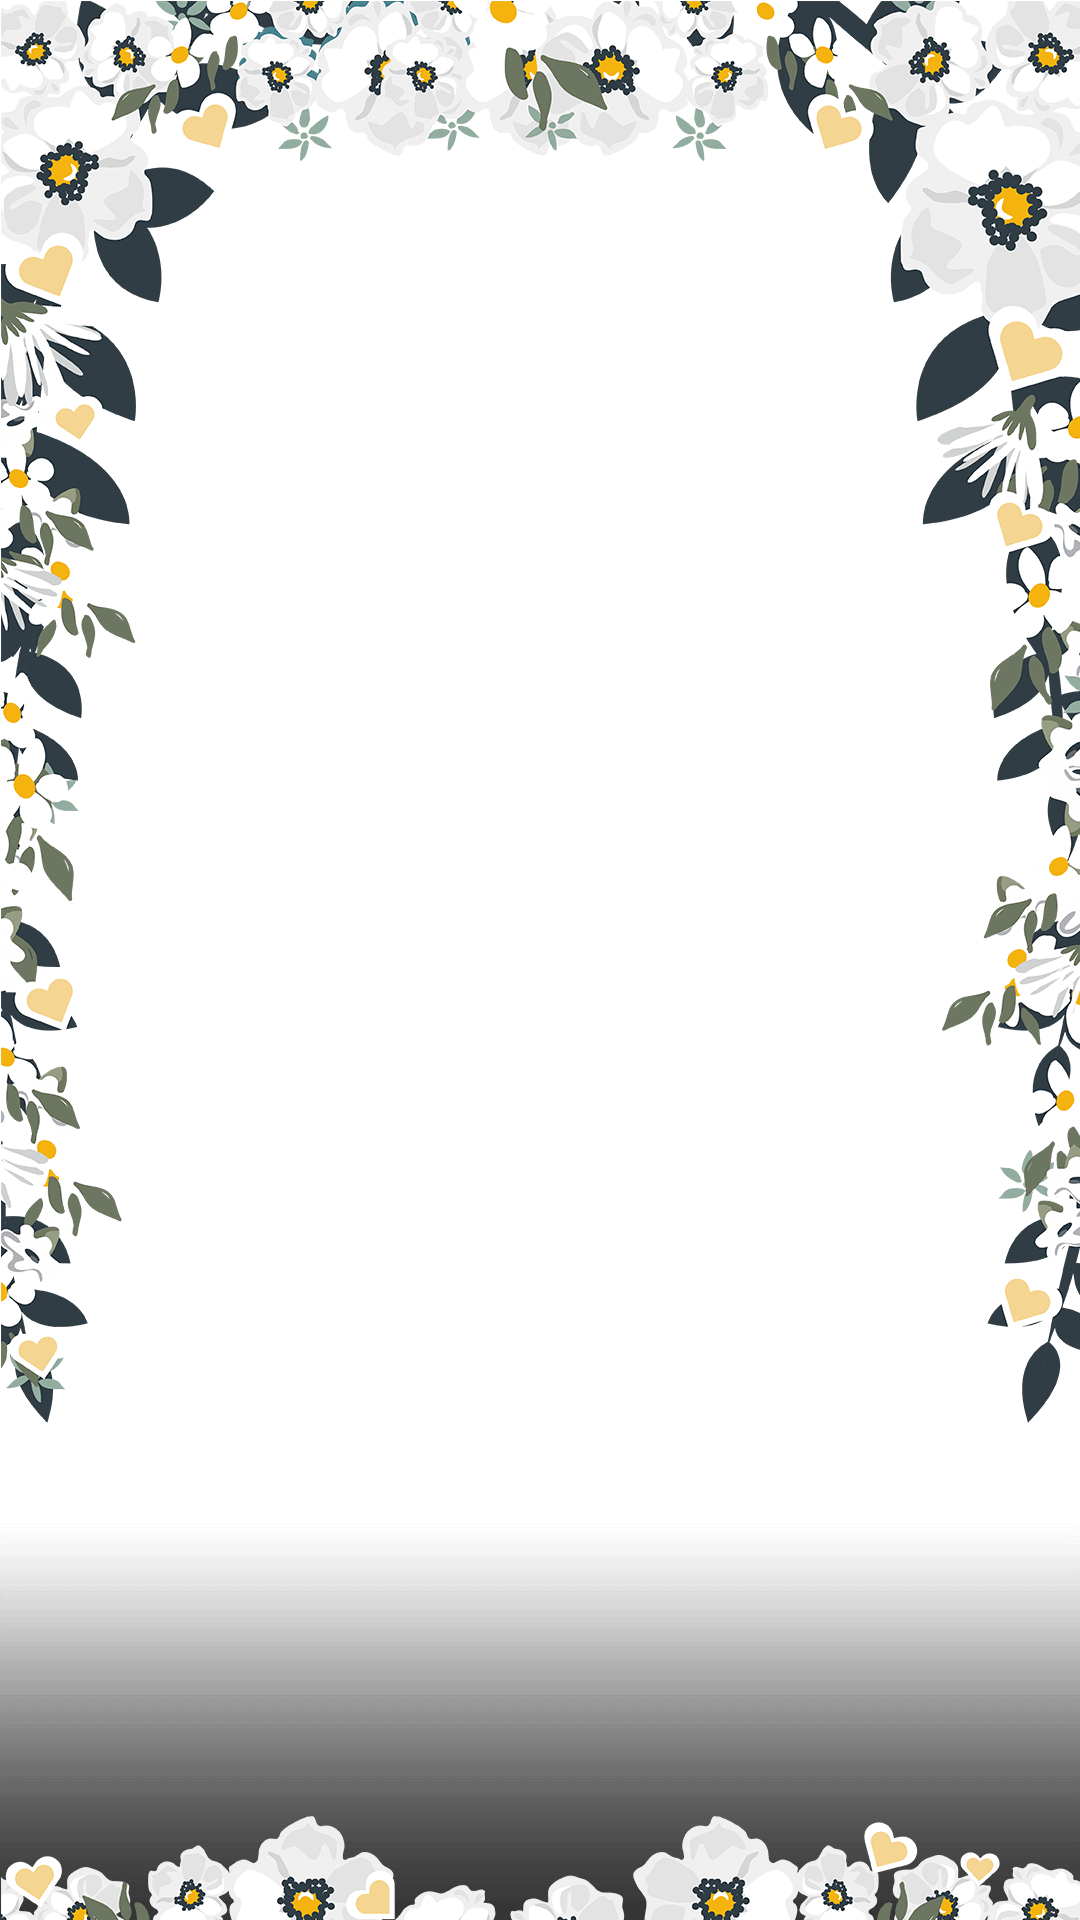 Download PNG image - Snapchat Filter PNG Clipart 